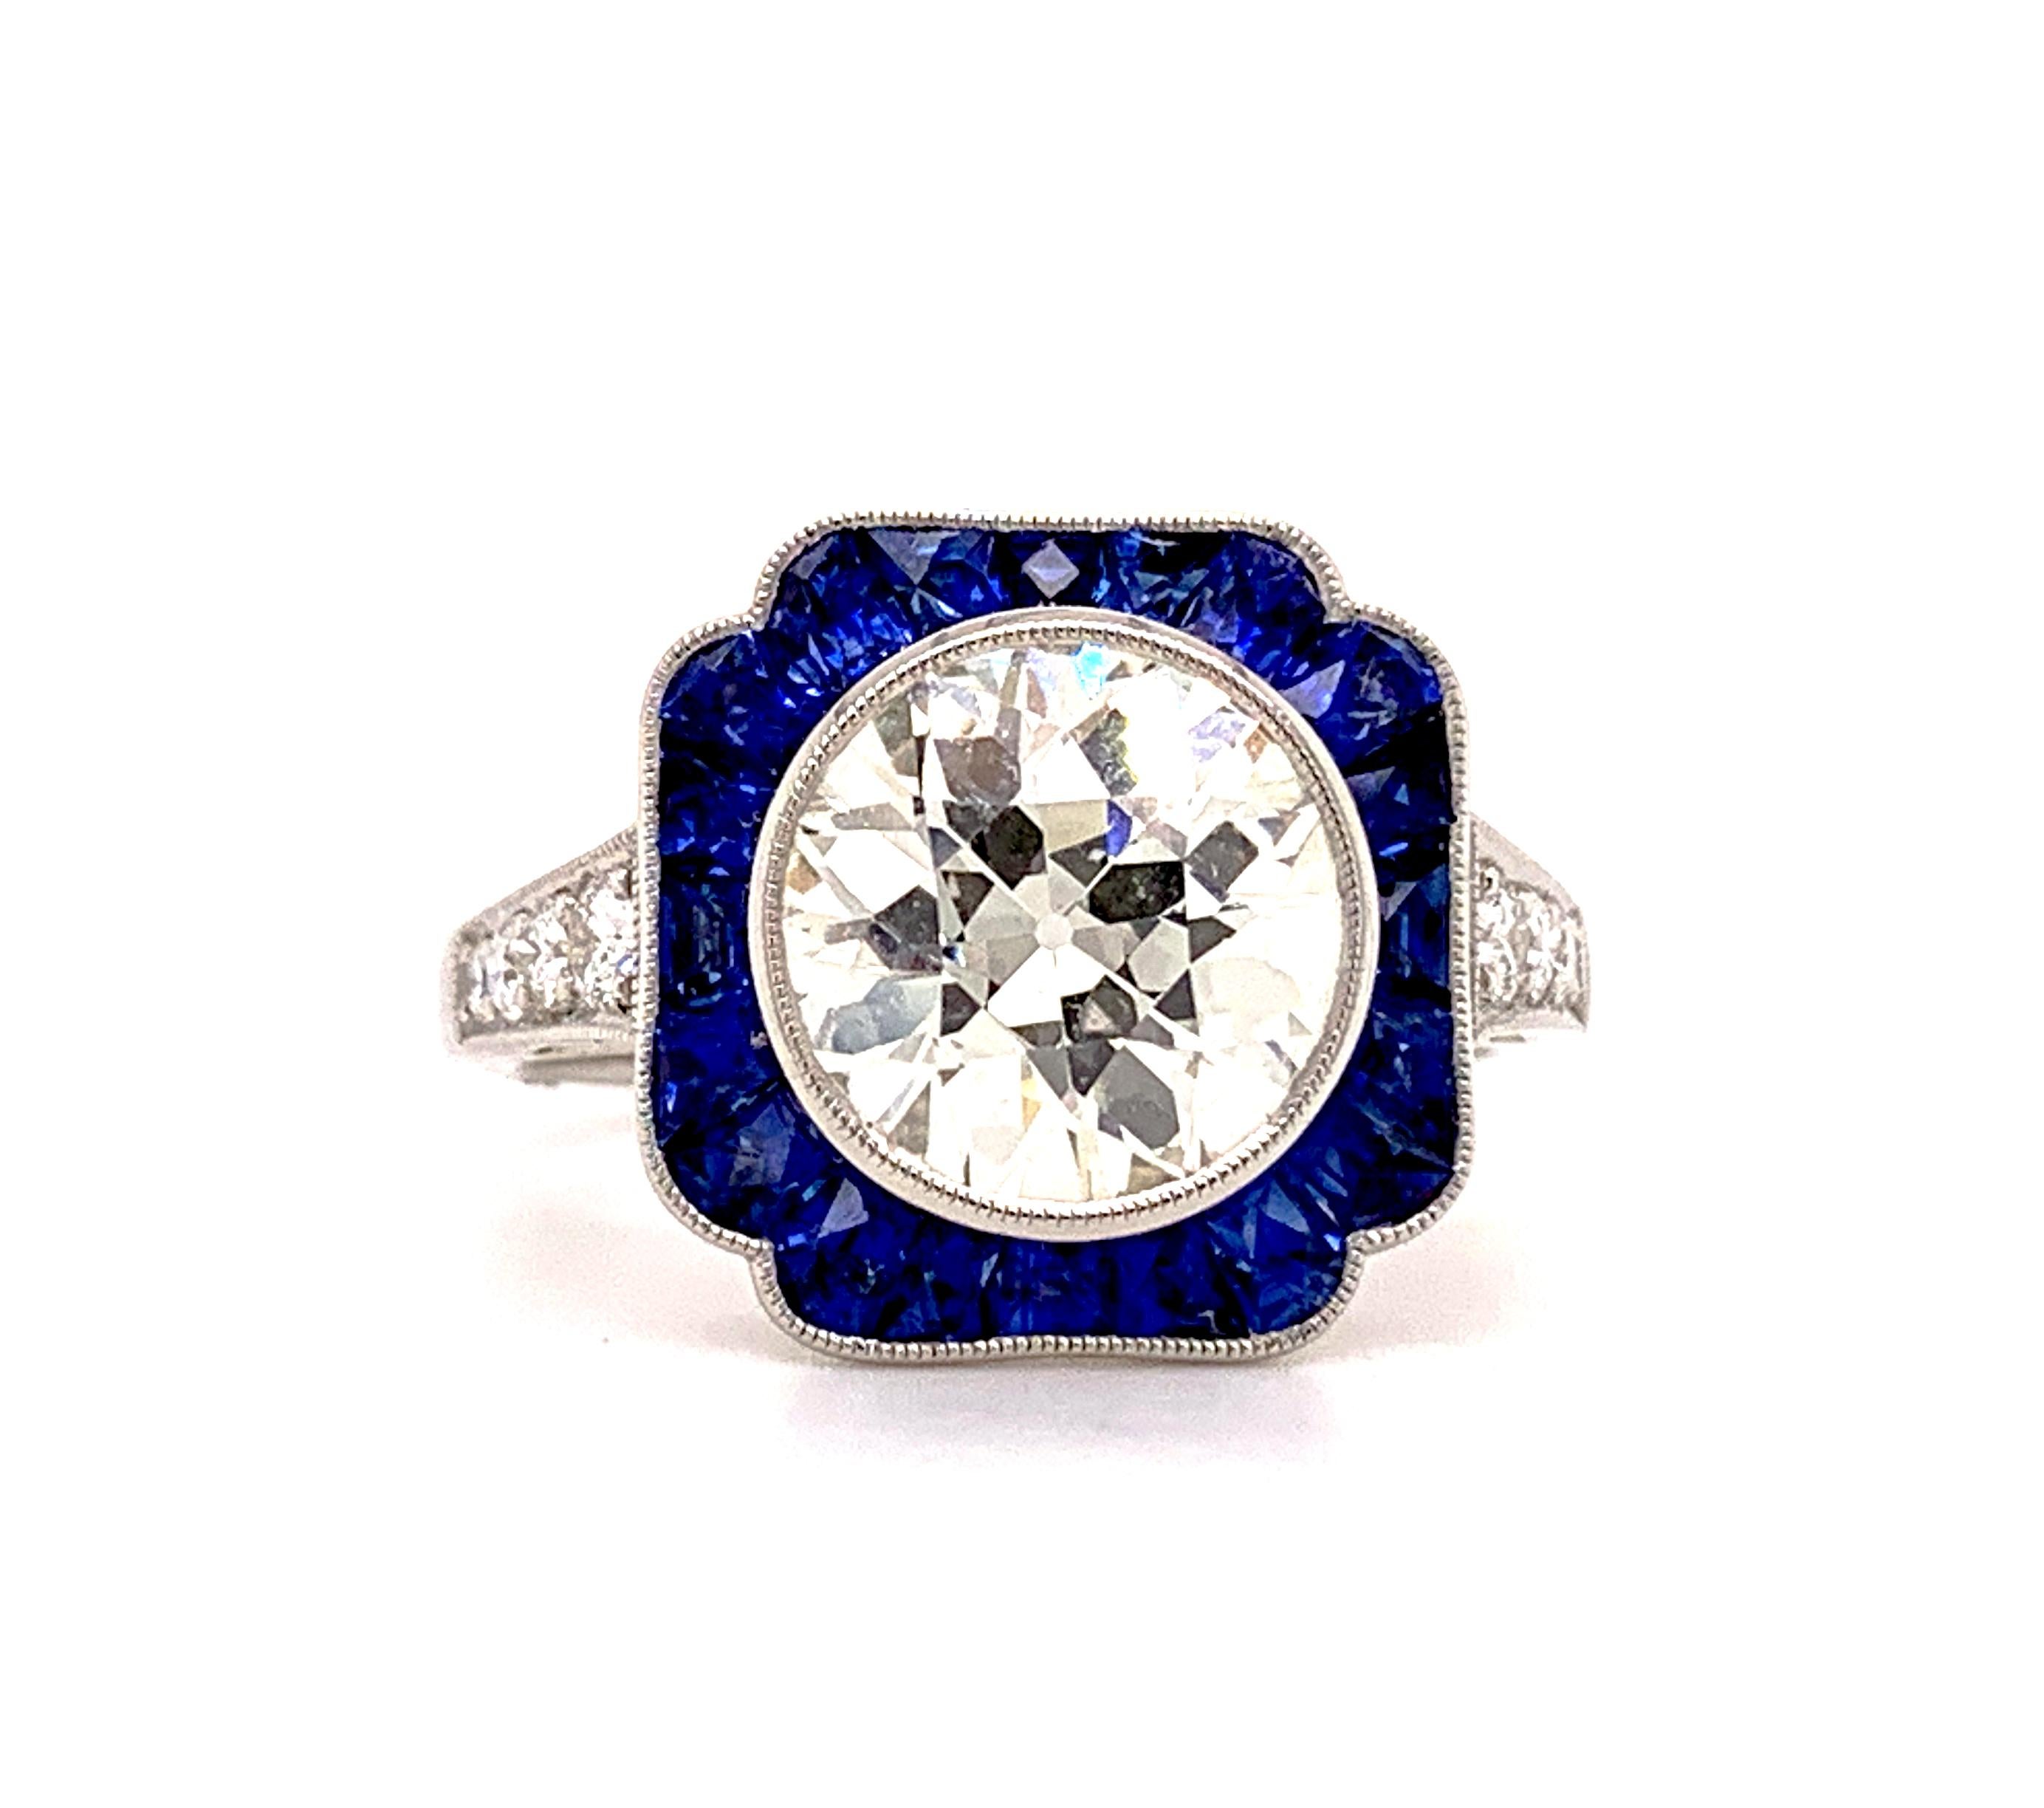 Art deco inspired ring set in platinum made with Old European Diamond center weighing 2.53 carats with a color and clarity of M-SI1 surrounded with blue sapphires weighing 1.15 carats and 0.19 carats of diamonds. 

Sophia D by Joseph Dardashti LTD